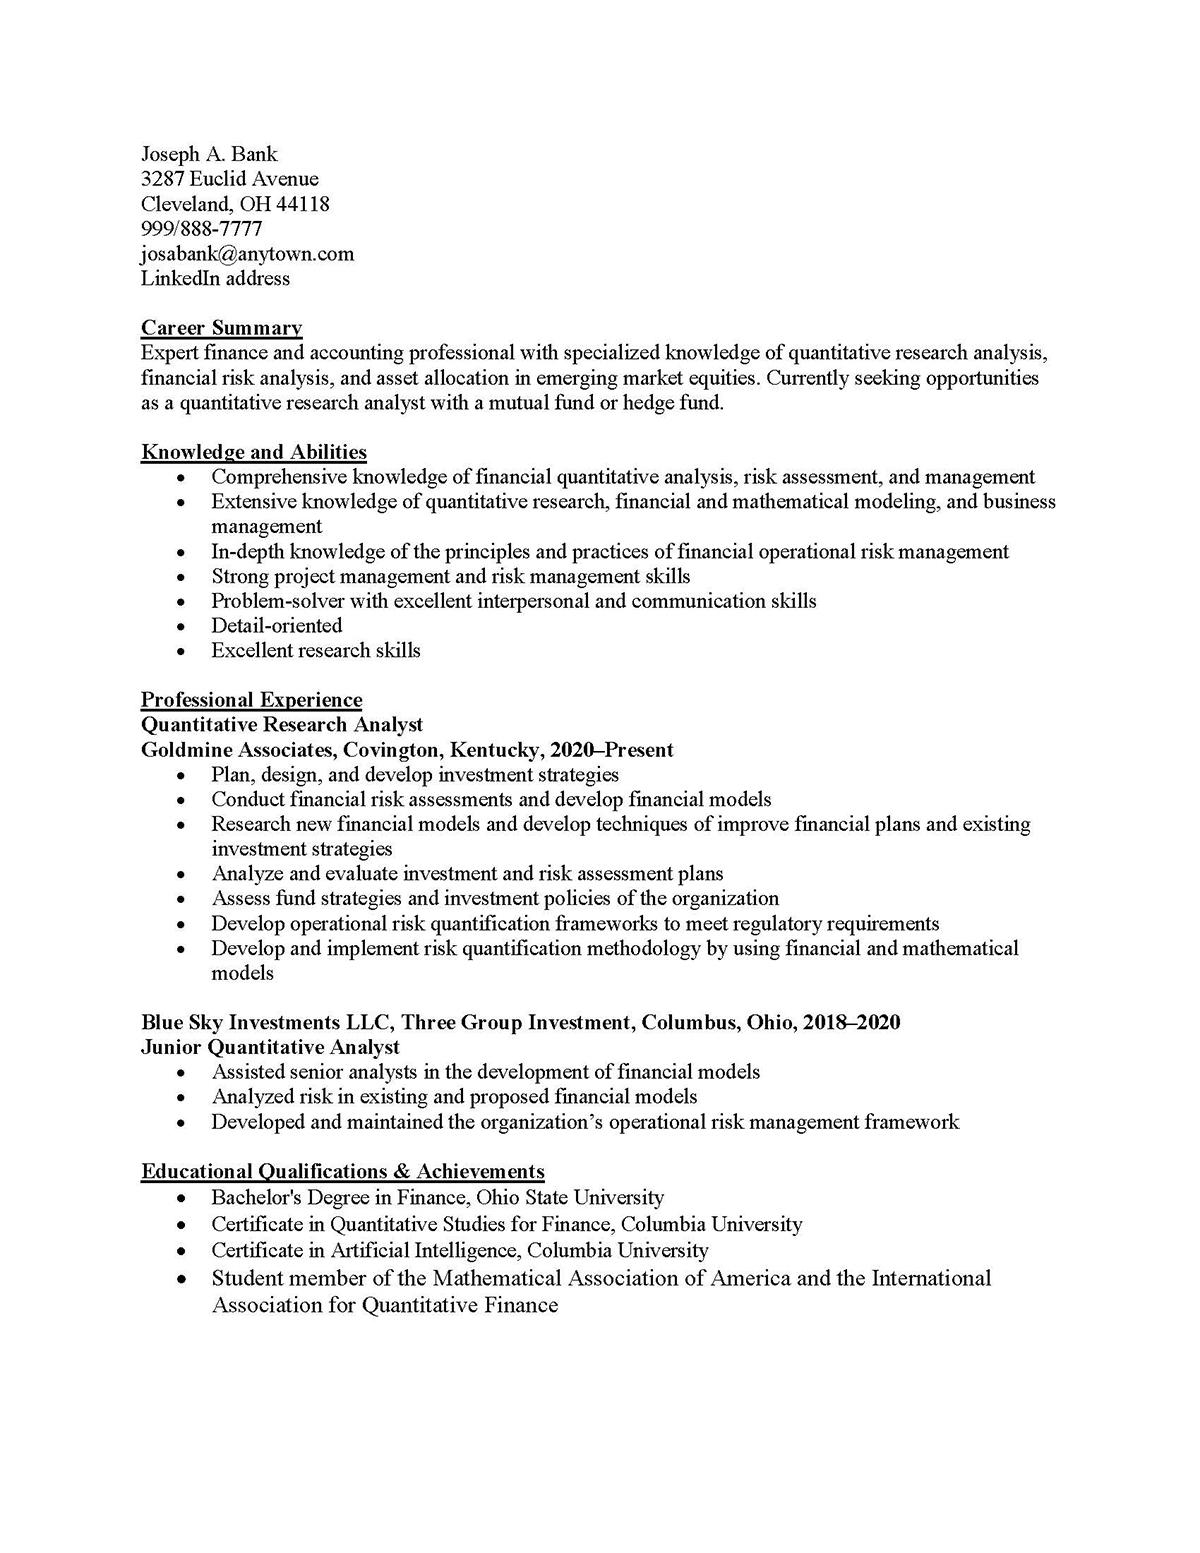 Sample resume: Finance, Mid Experience, Combination